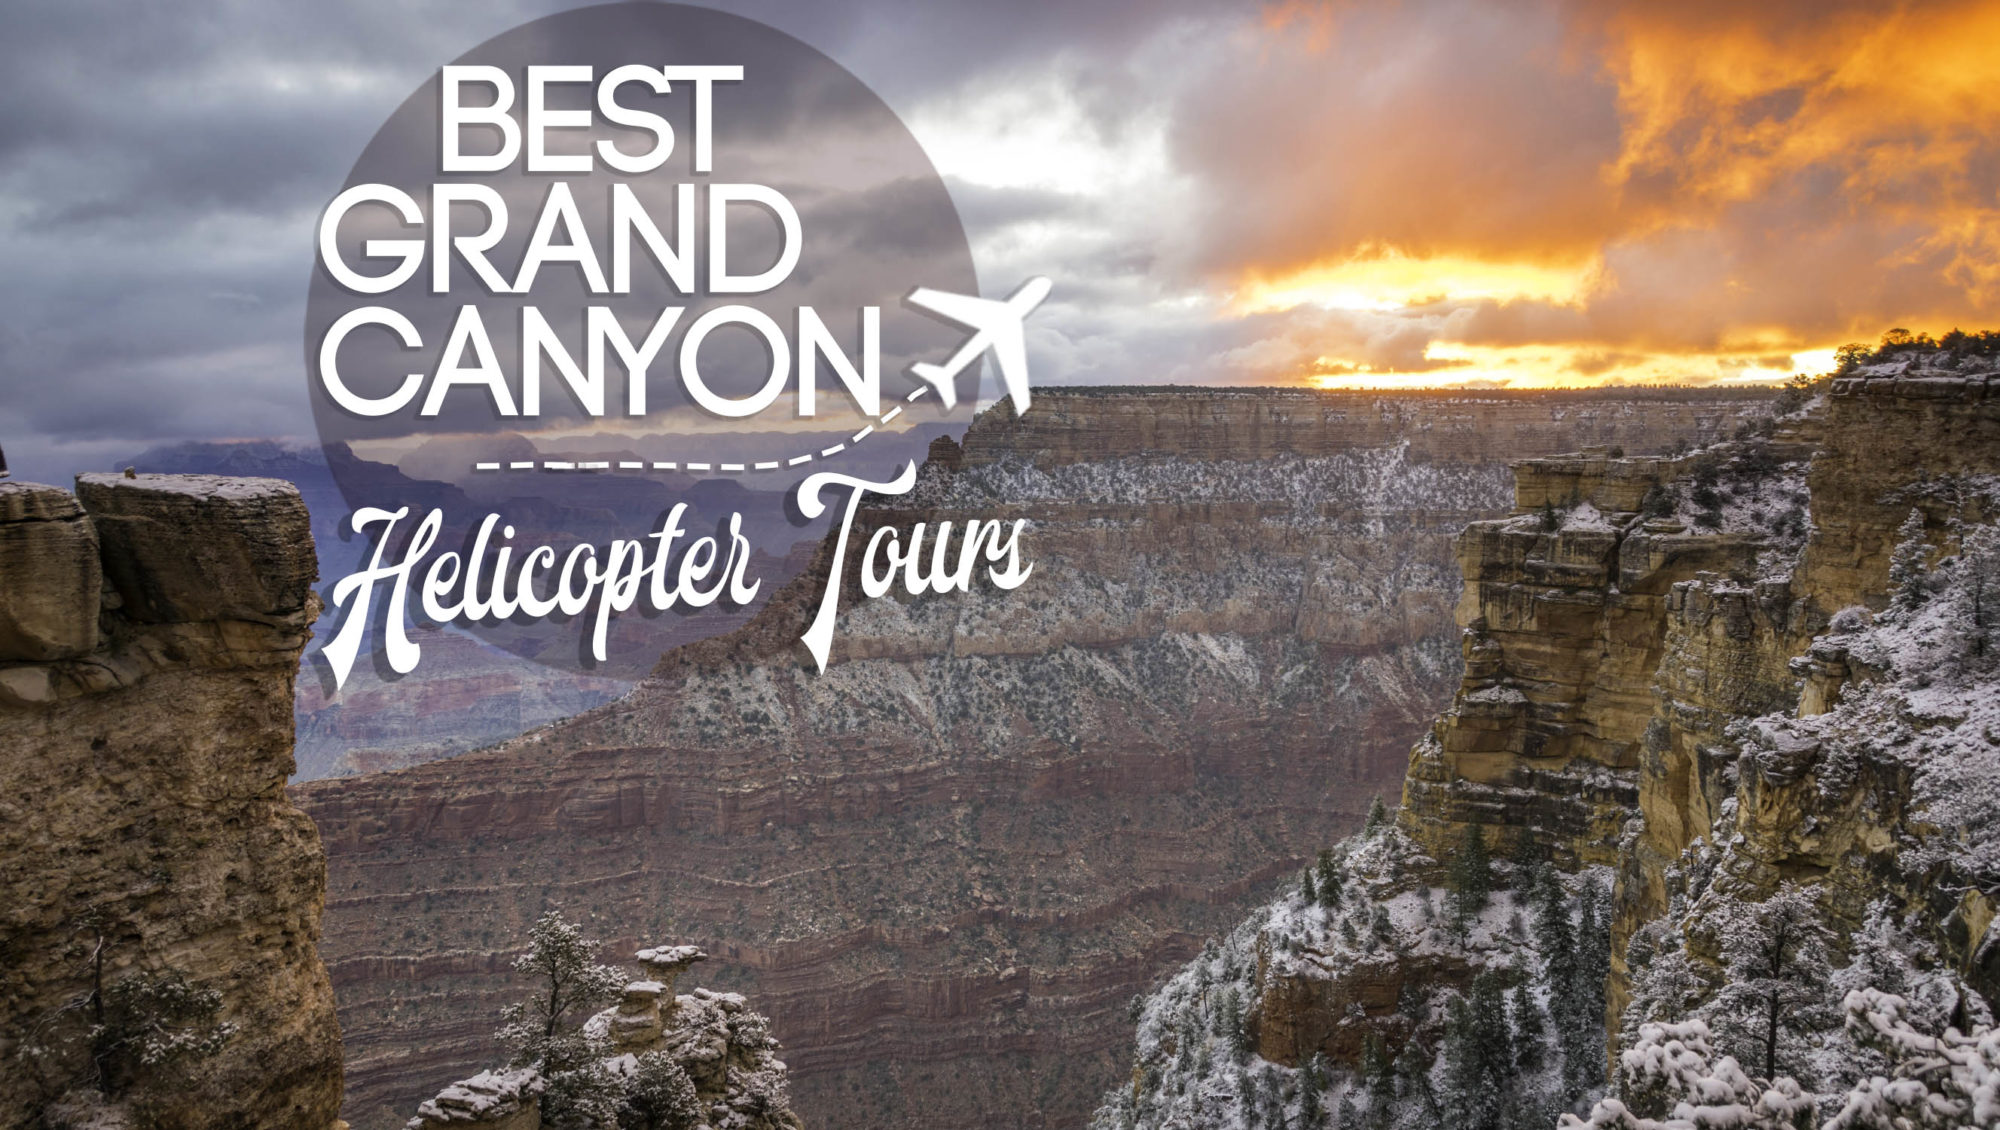 Cheapest Grand Canyon Helicopter Tours Compared